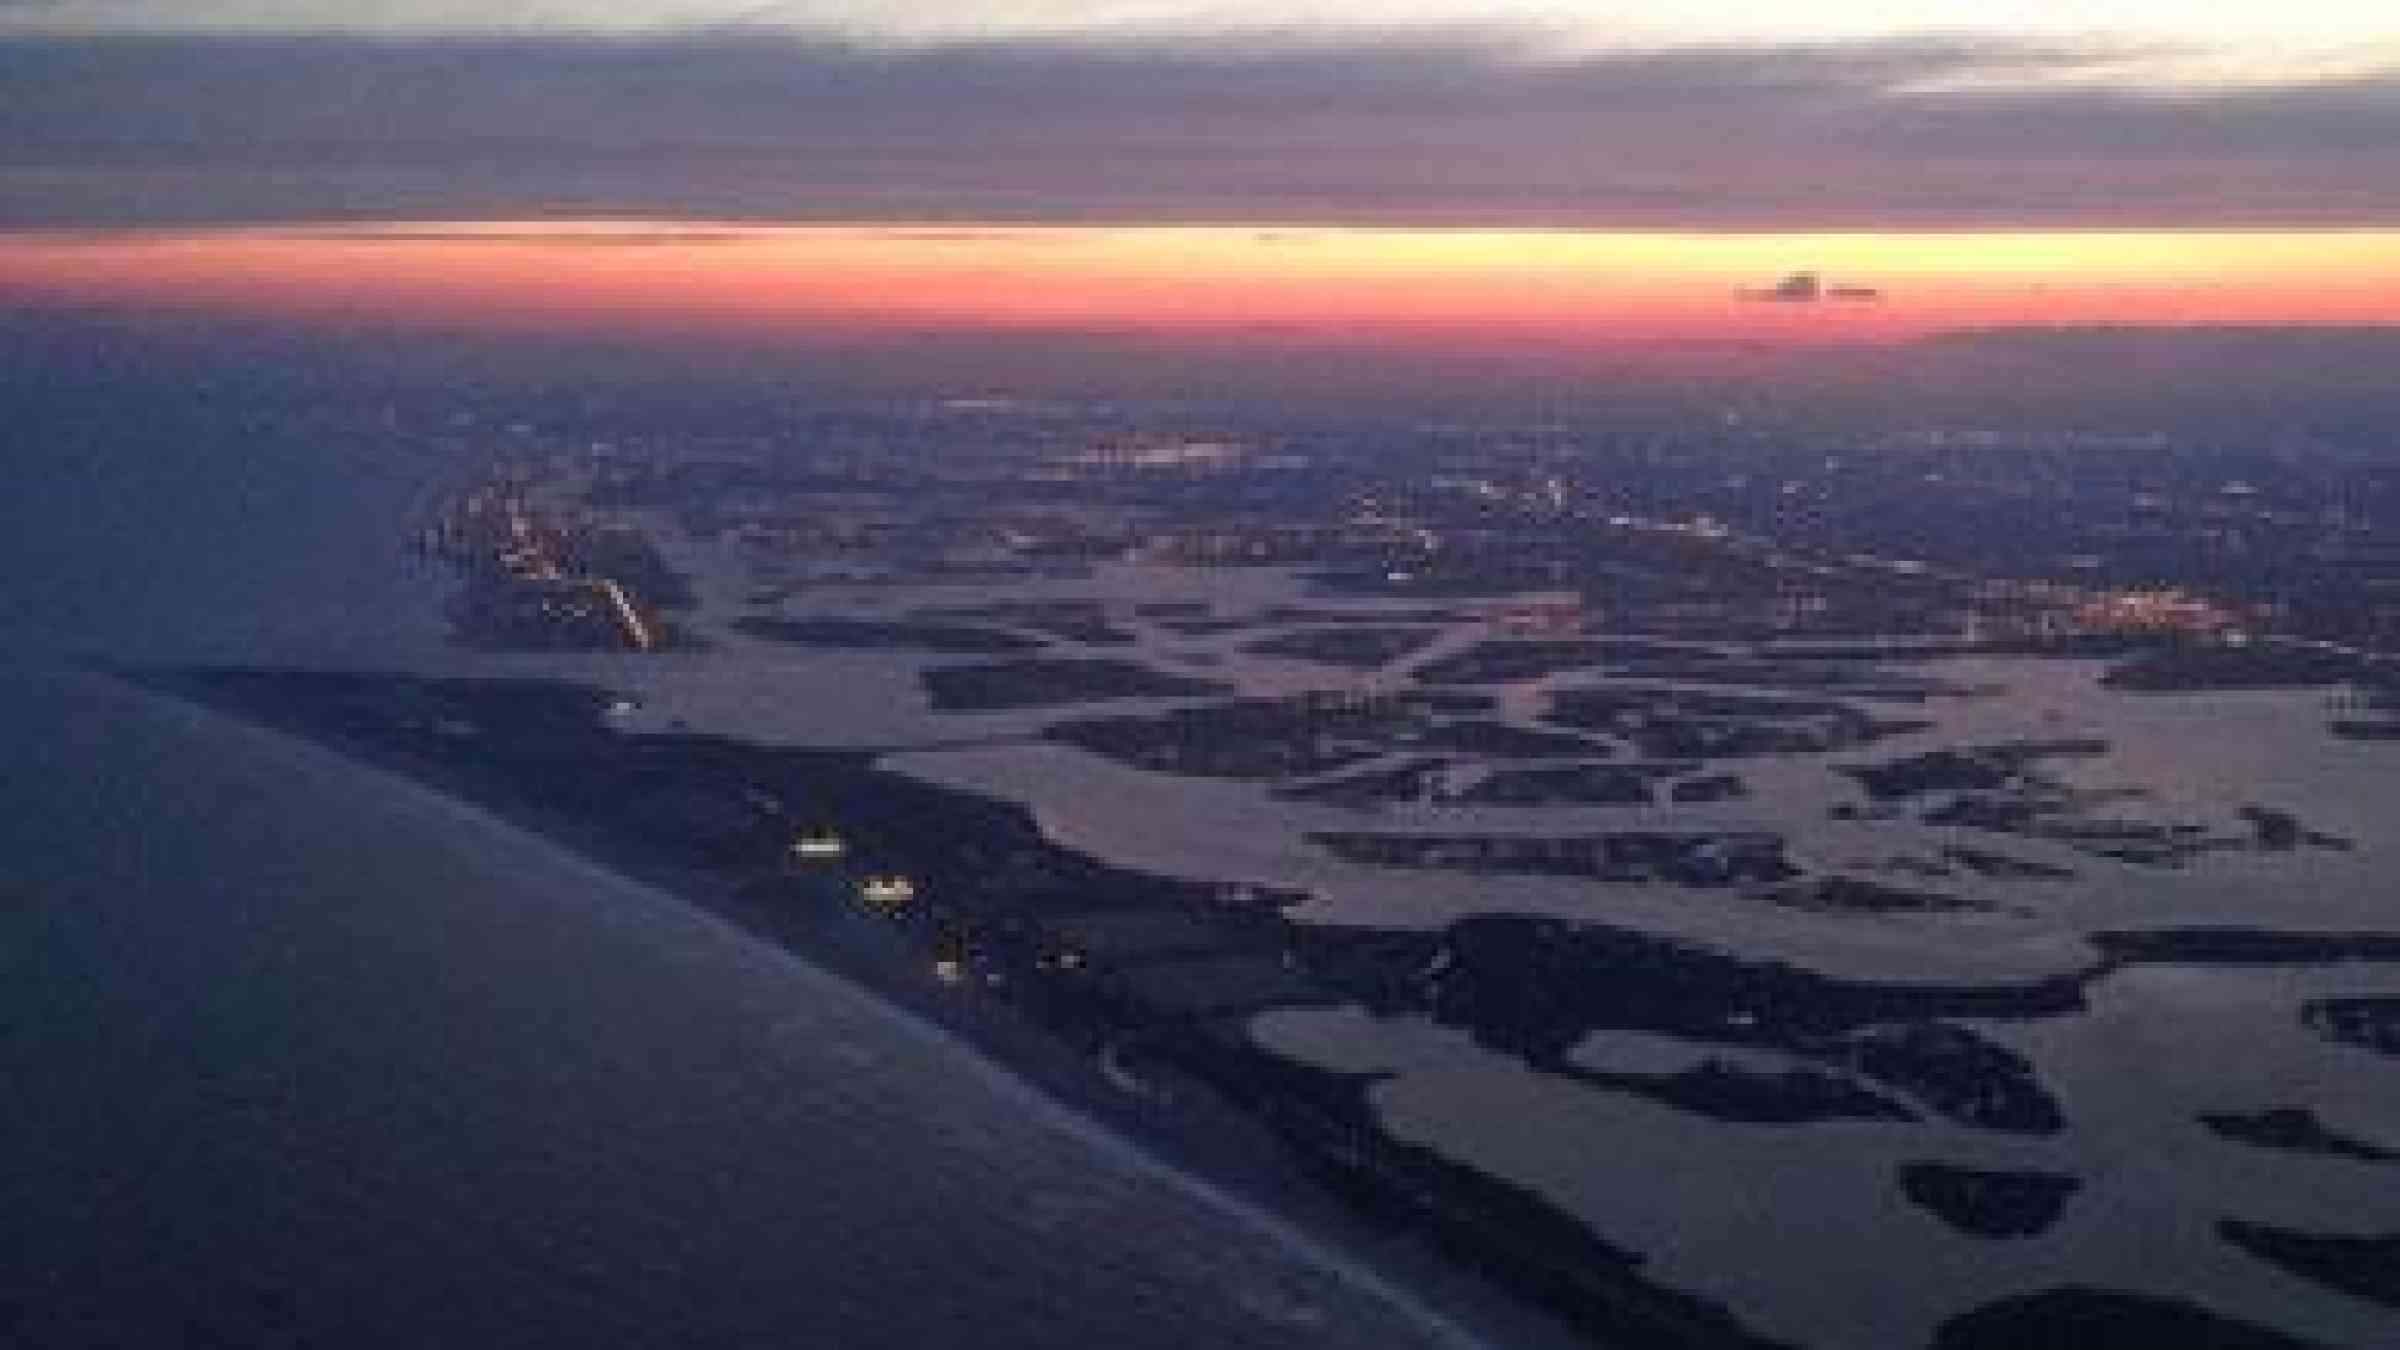 Jones Beach and the Rockaways at Magic Hour Viewd from a Plane landing at JFK - New York City, by Flickr user Chris Goldberg, CC BY-NC 2.0, https://www.flickr.com/photos/chrisgold/14368400539